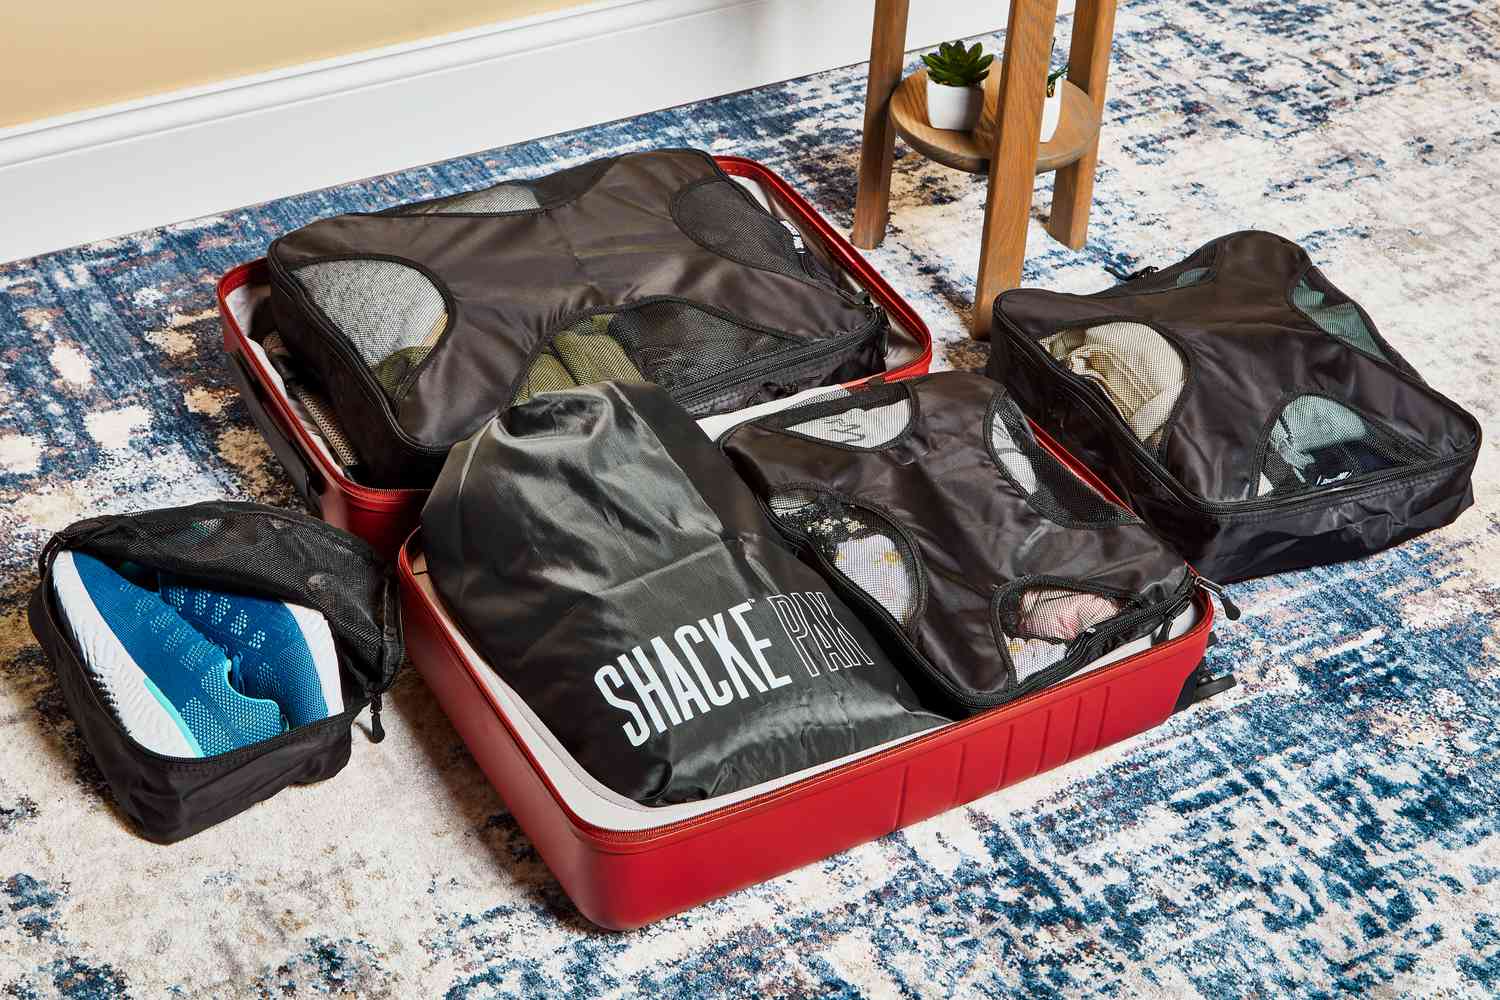 Shacke Pak 5 Set Packing Cubes displayed in an open suitcase on a blue rug